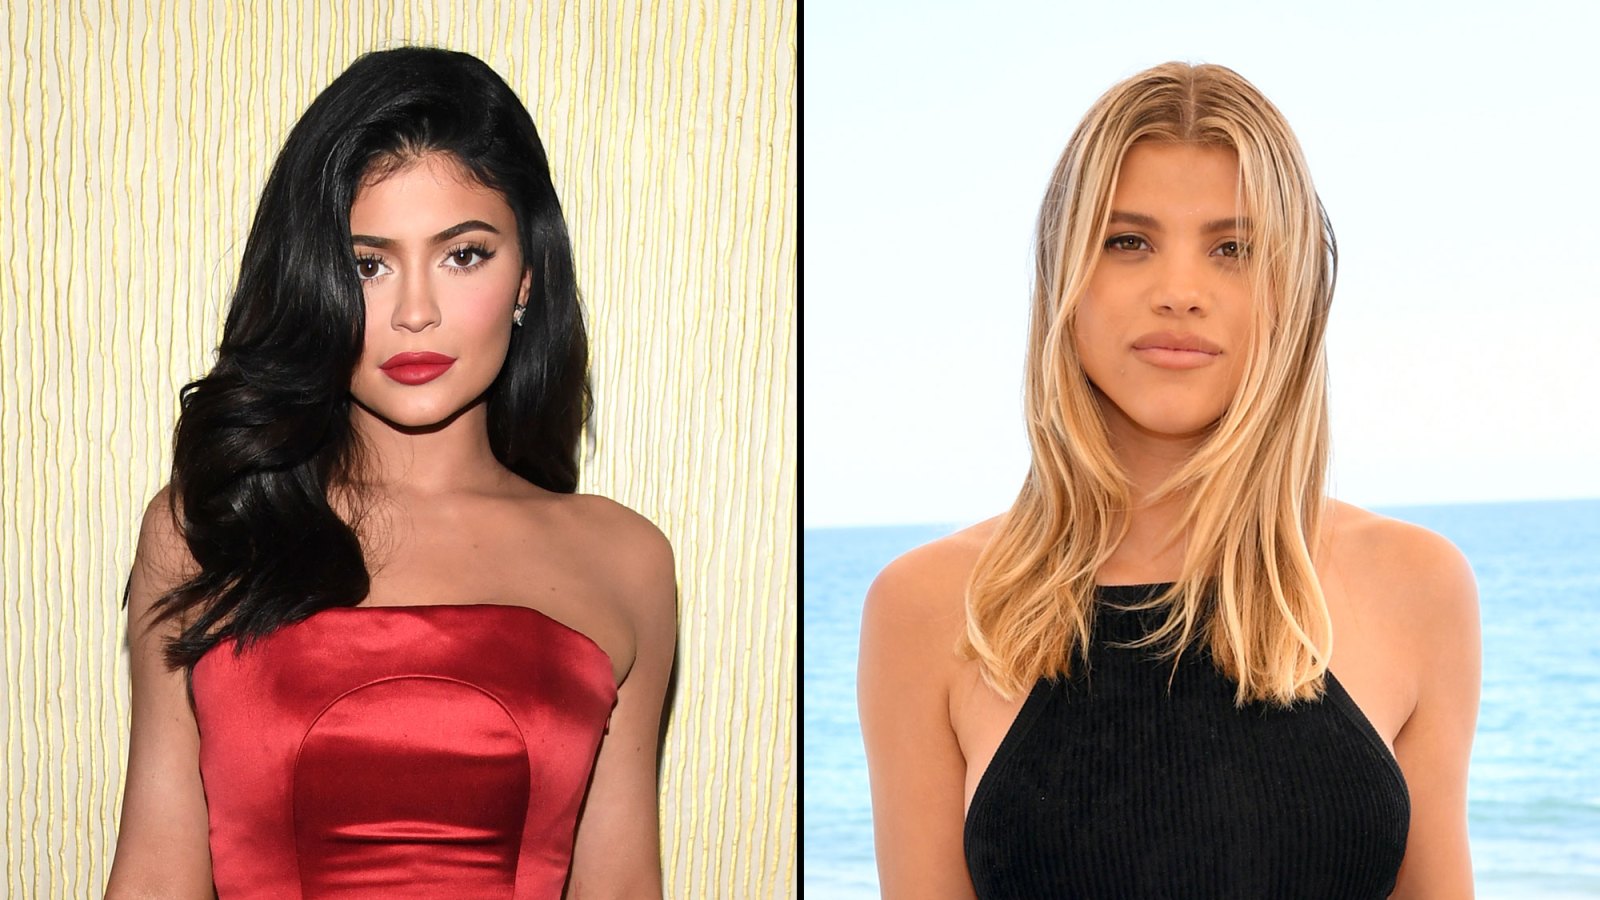 Kylie Jenner and Sofia Richie Pose Nude